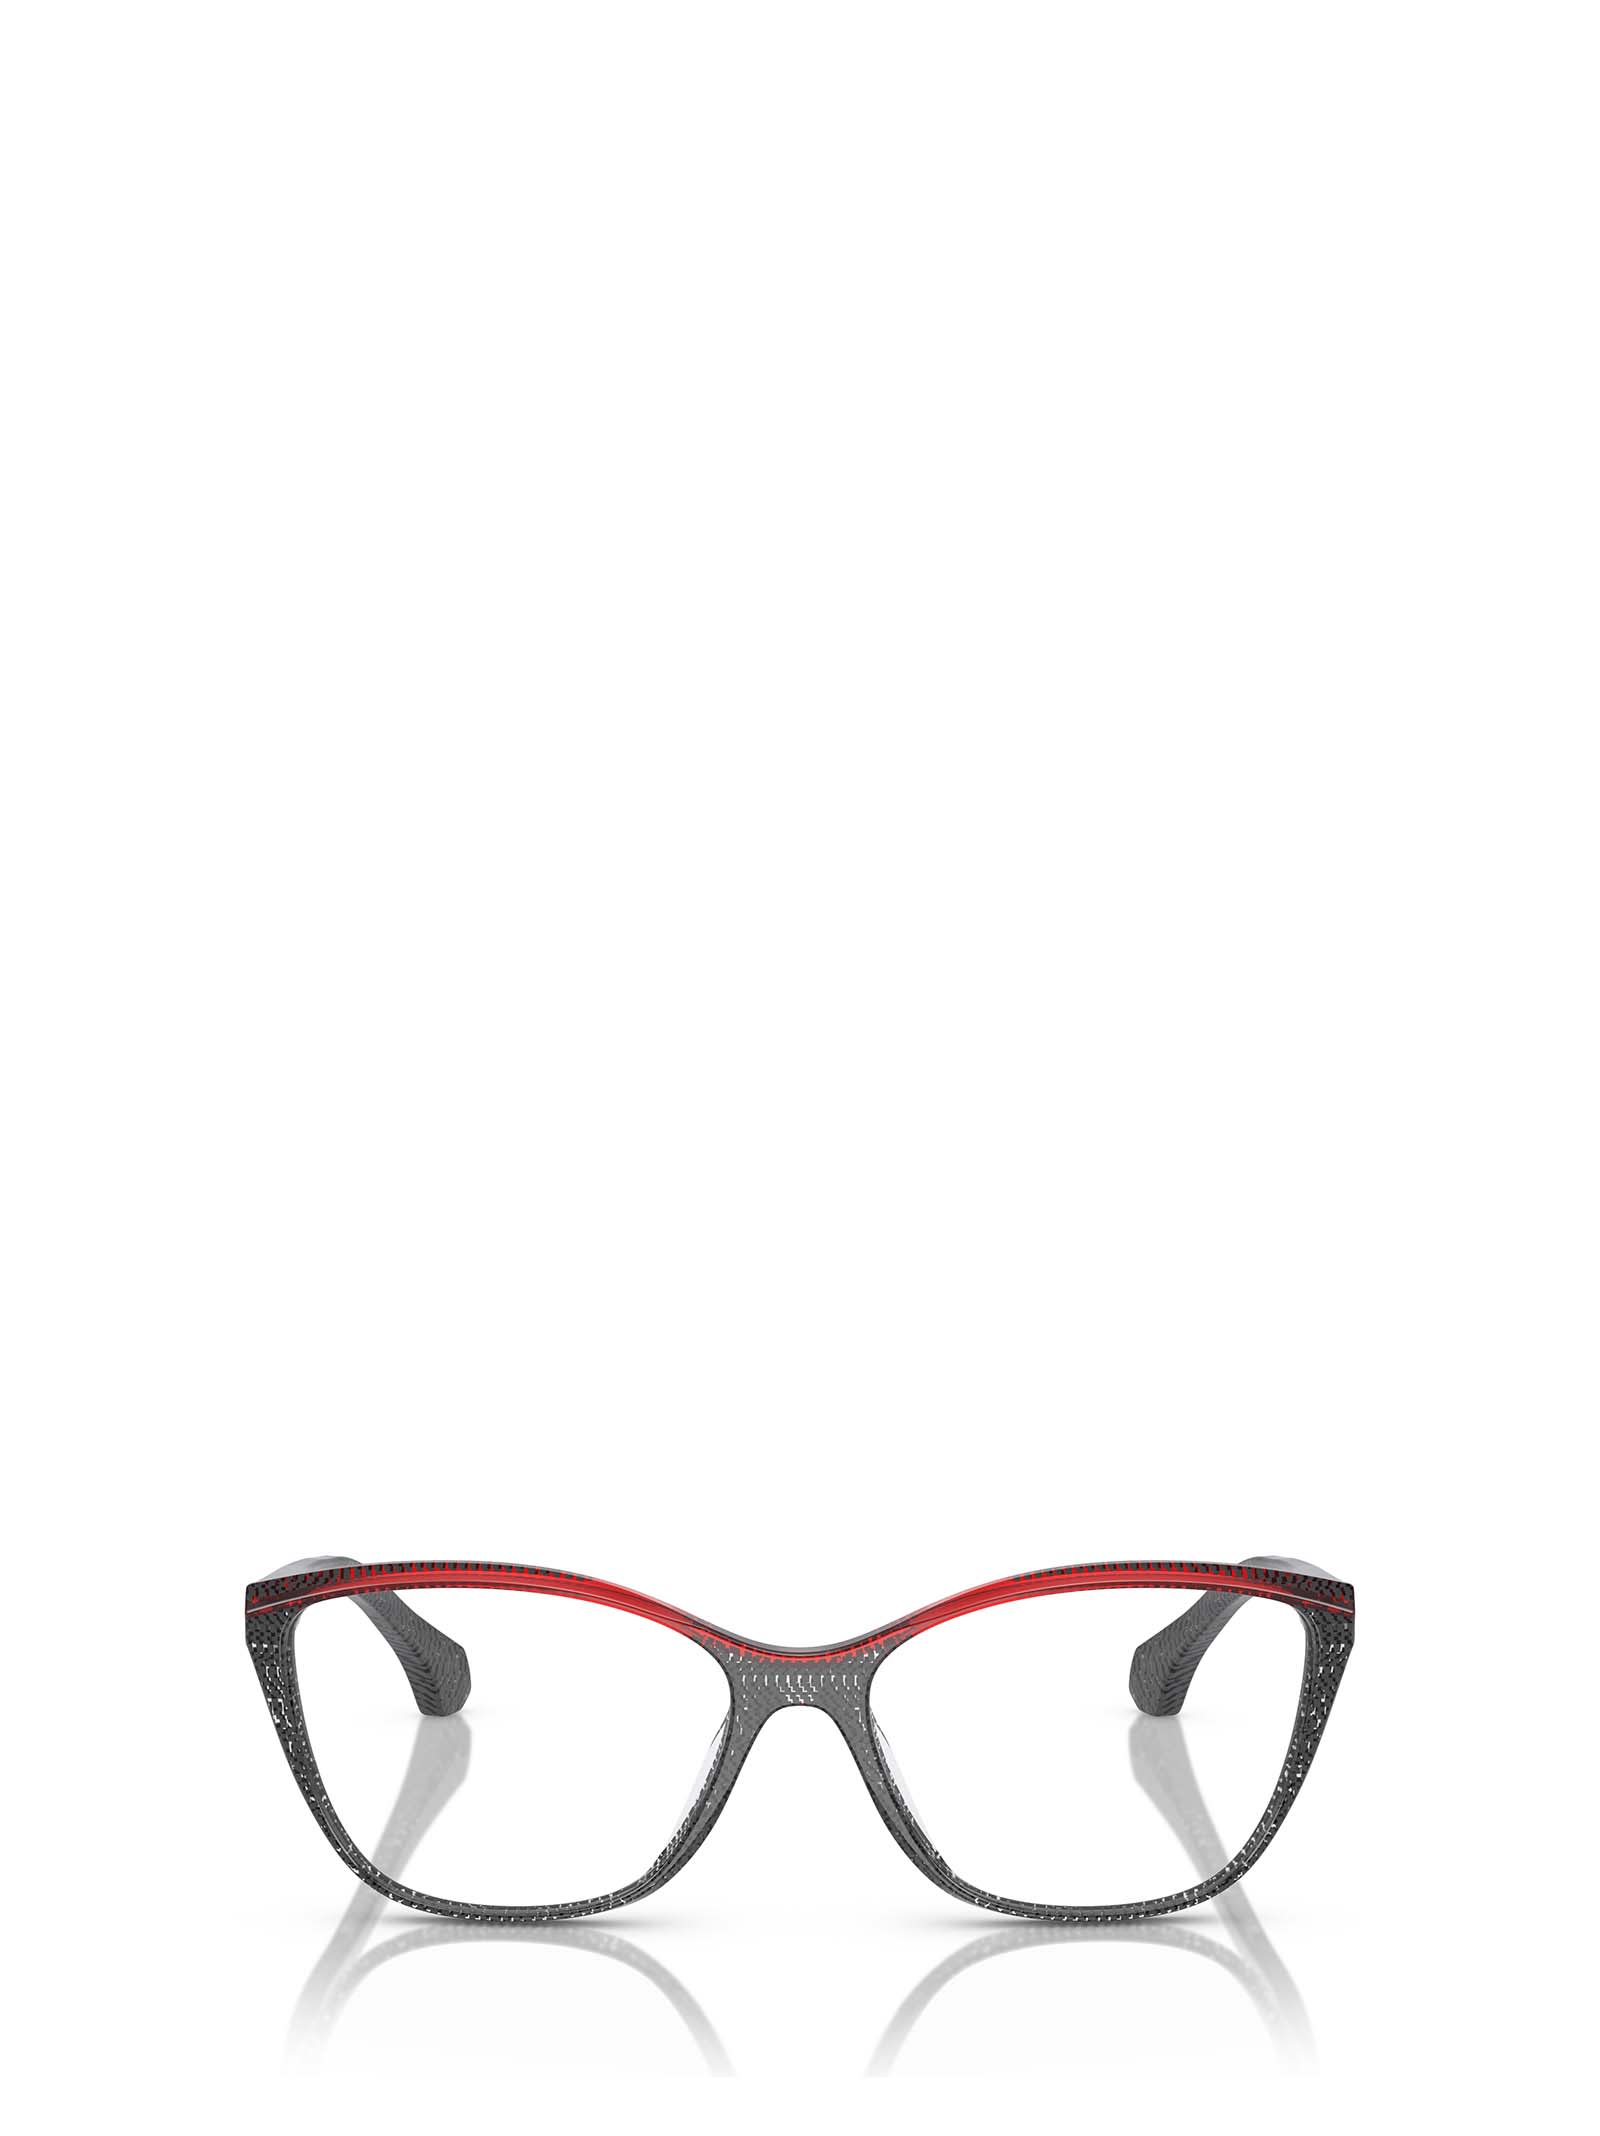 Alain Mikli A03502 New Pointillee Grey/red Glasses